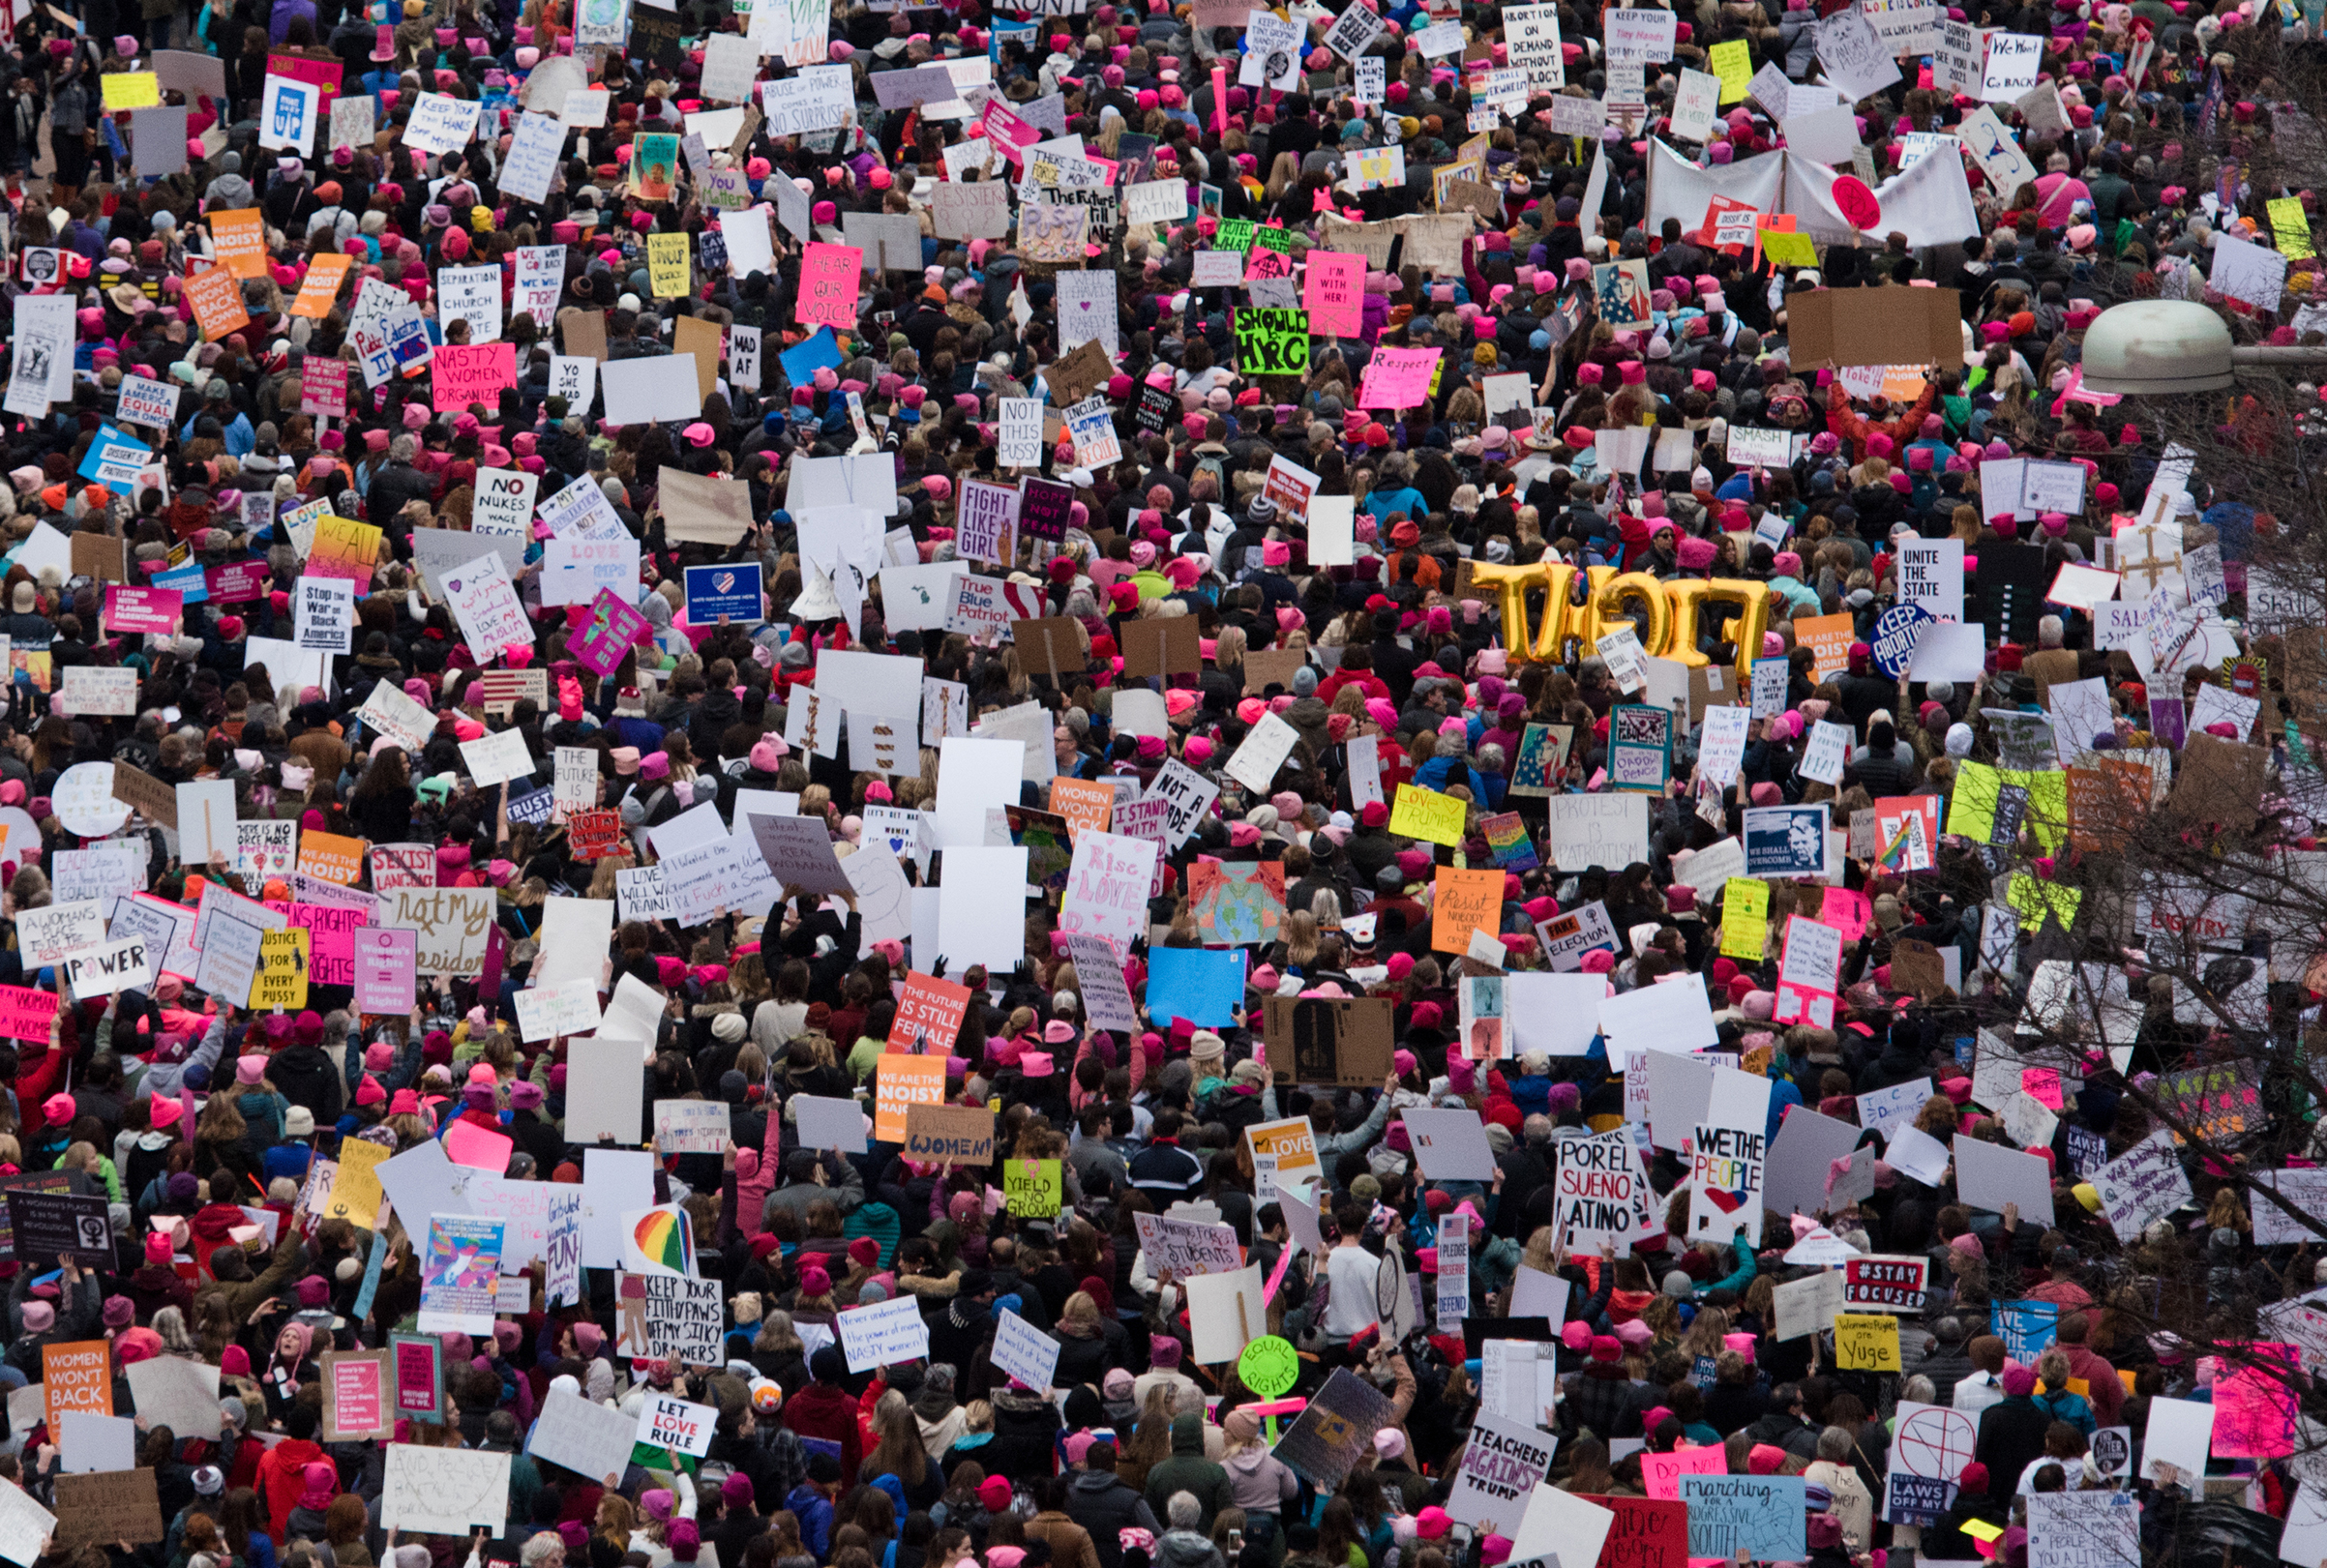 A view of demonstrators marching on Pennsylvania Avenue during the Women's March on Washington on January 21, 2017. (Noam Galai—WireImage/ Getty Images)